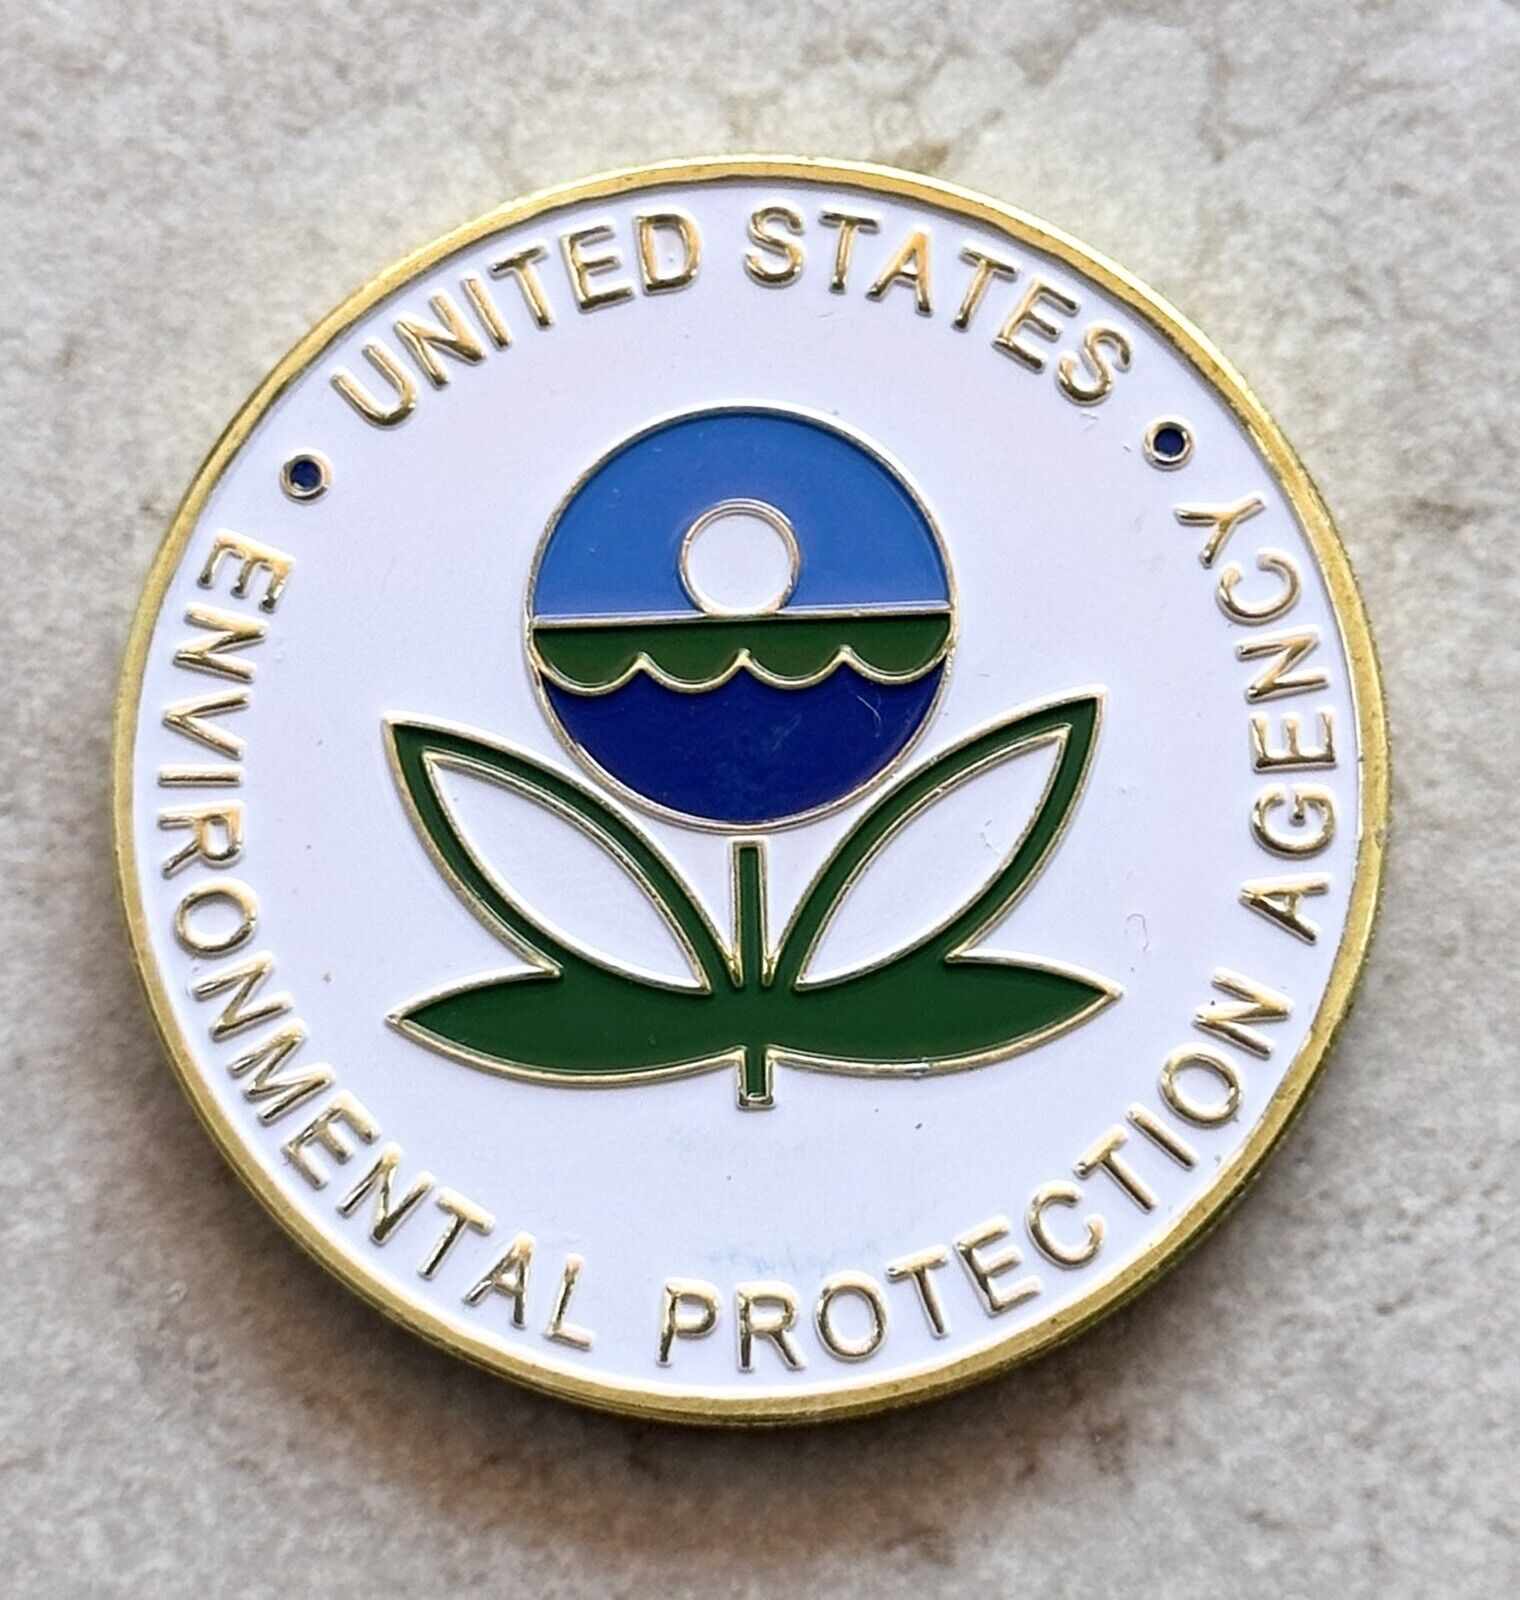 ENVIRONMENTAL PROTECTION AGENCY (EPA) Government Agency Challenge Coin